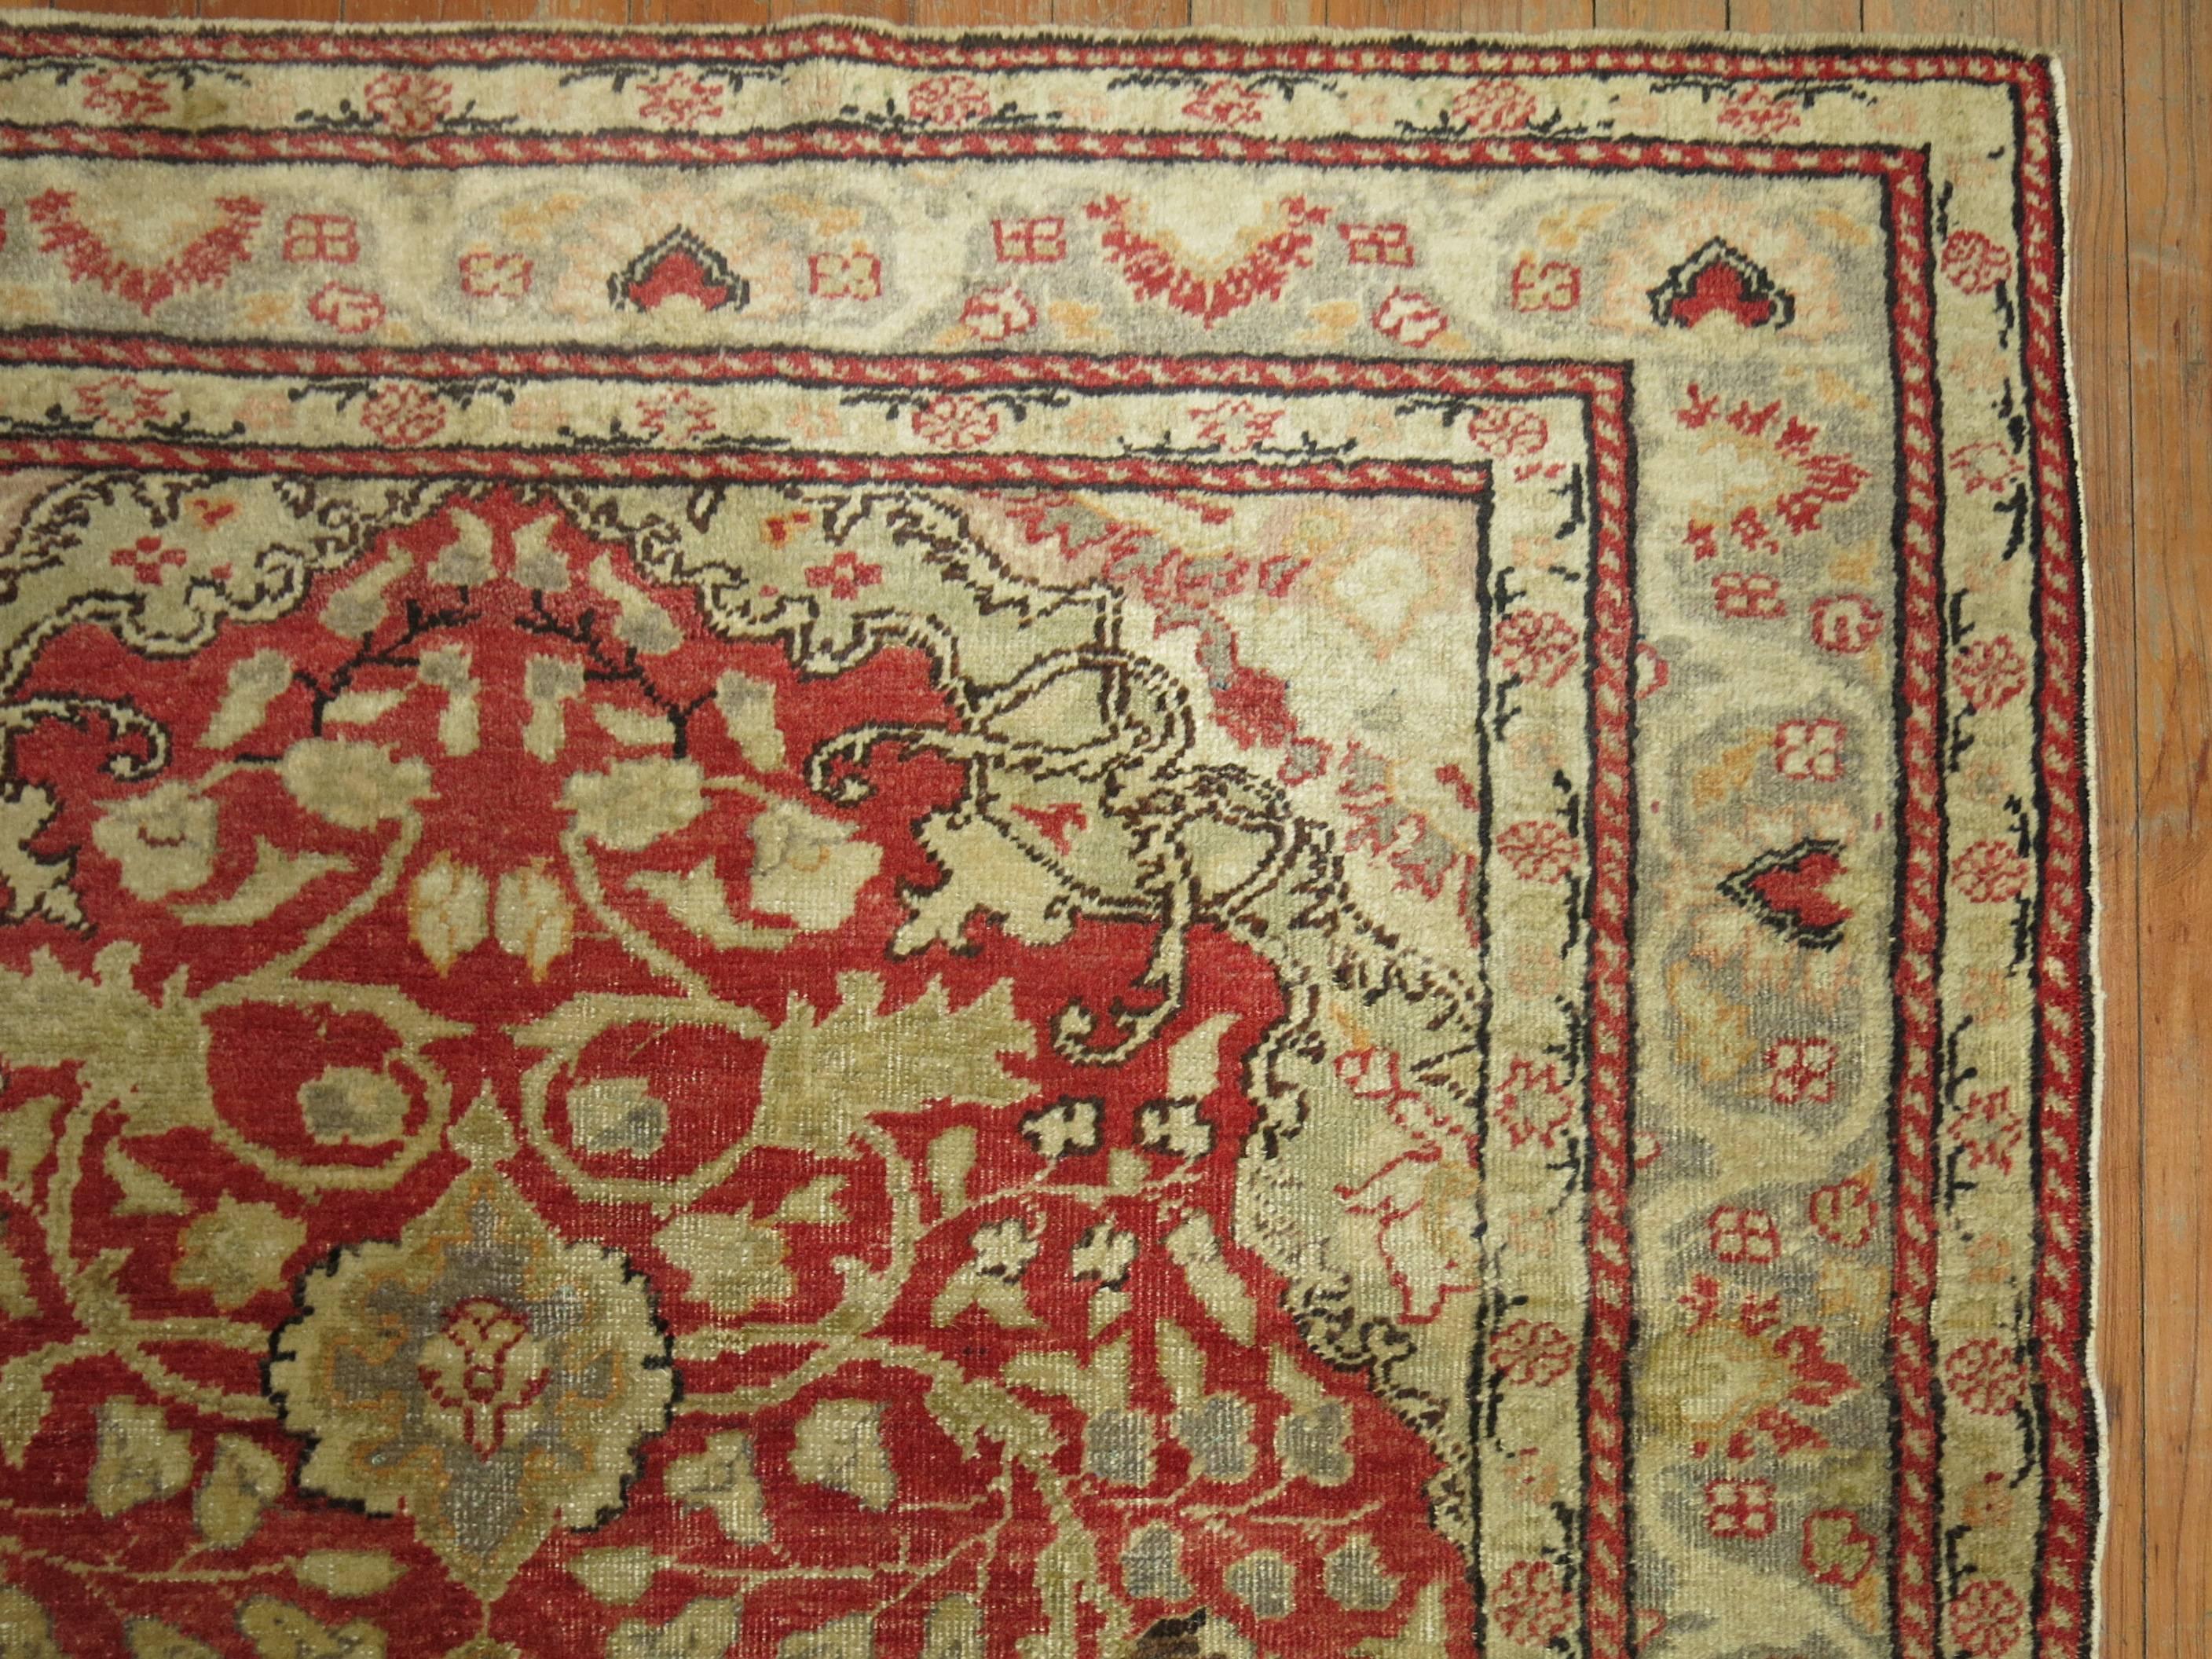 Accent size Turkish Oushak rug in predominant true red tones.